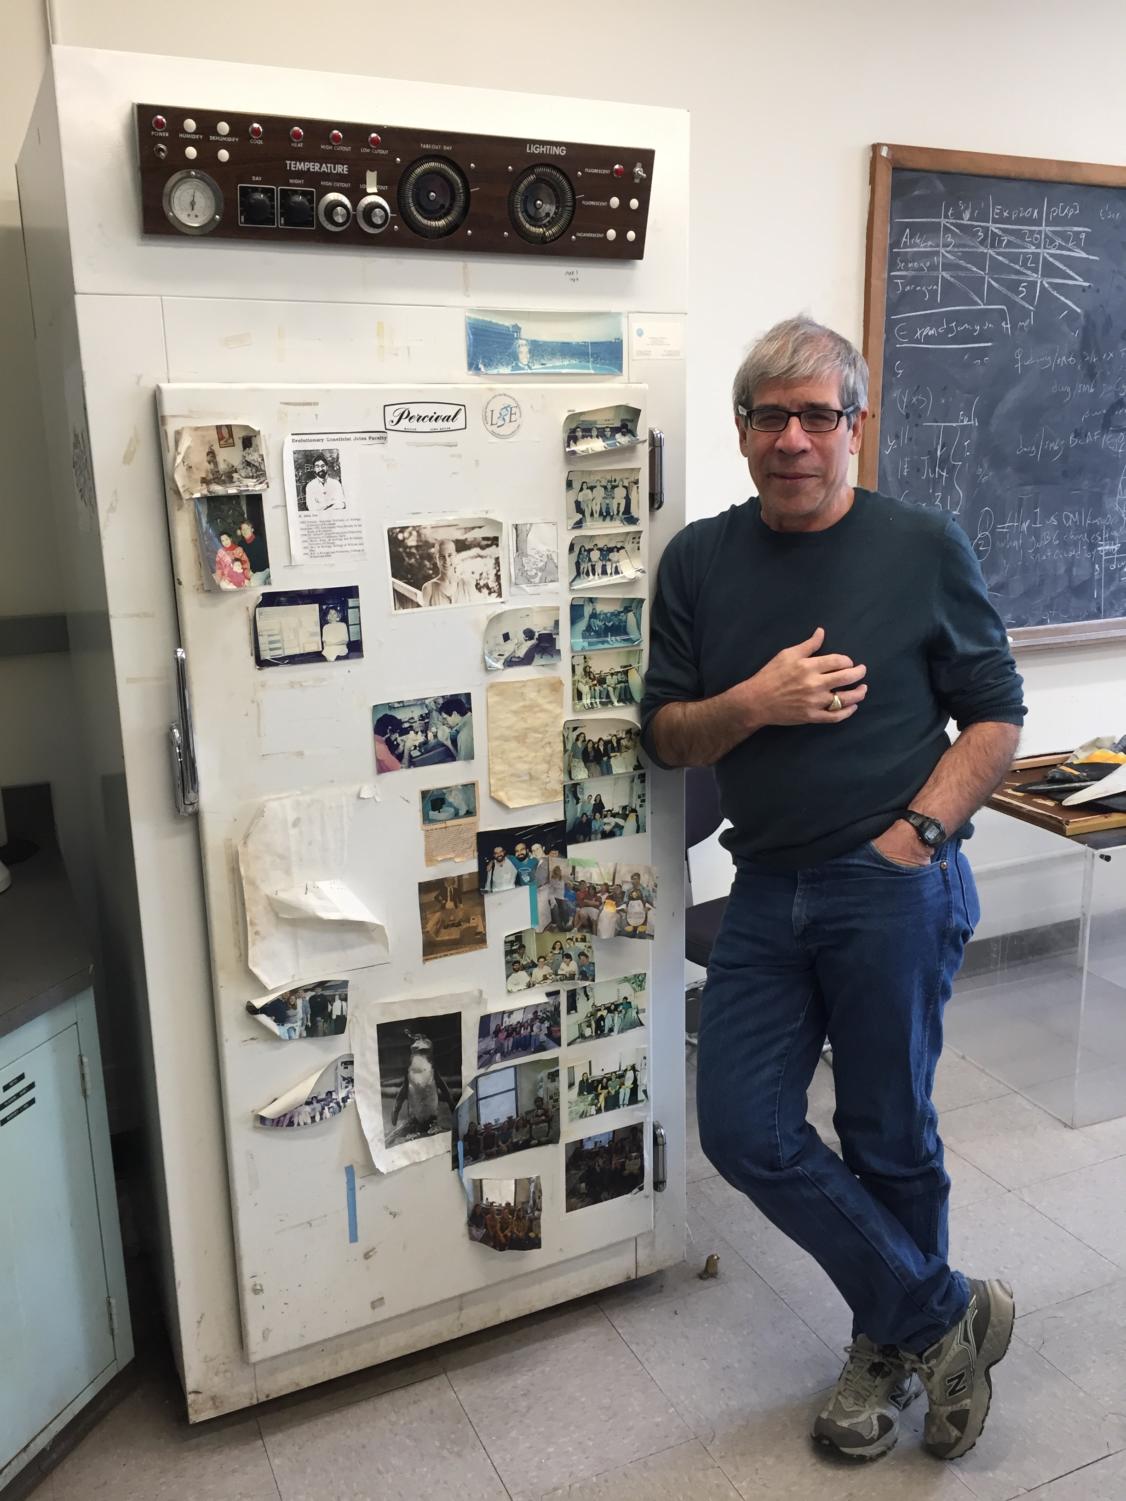 Coyne stands besides pictures of past lab teams taped to a now-empty incubator.